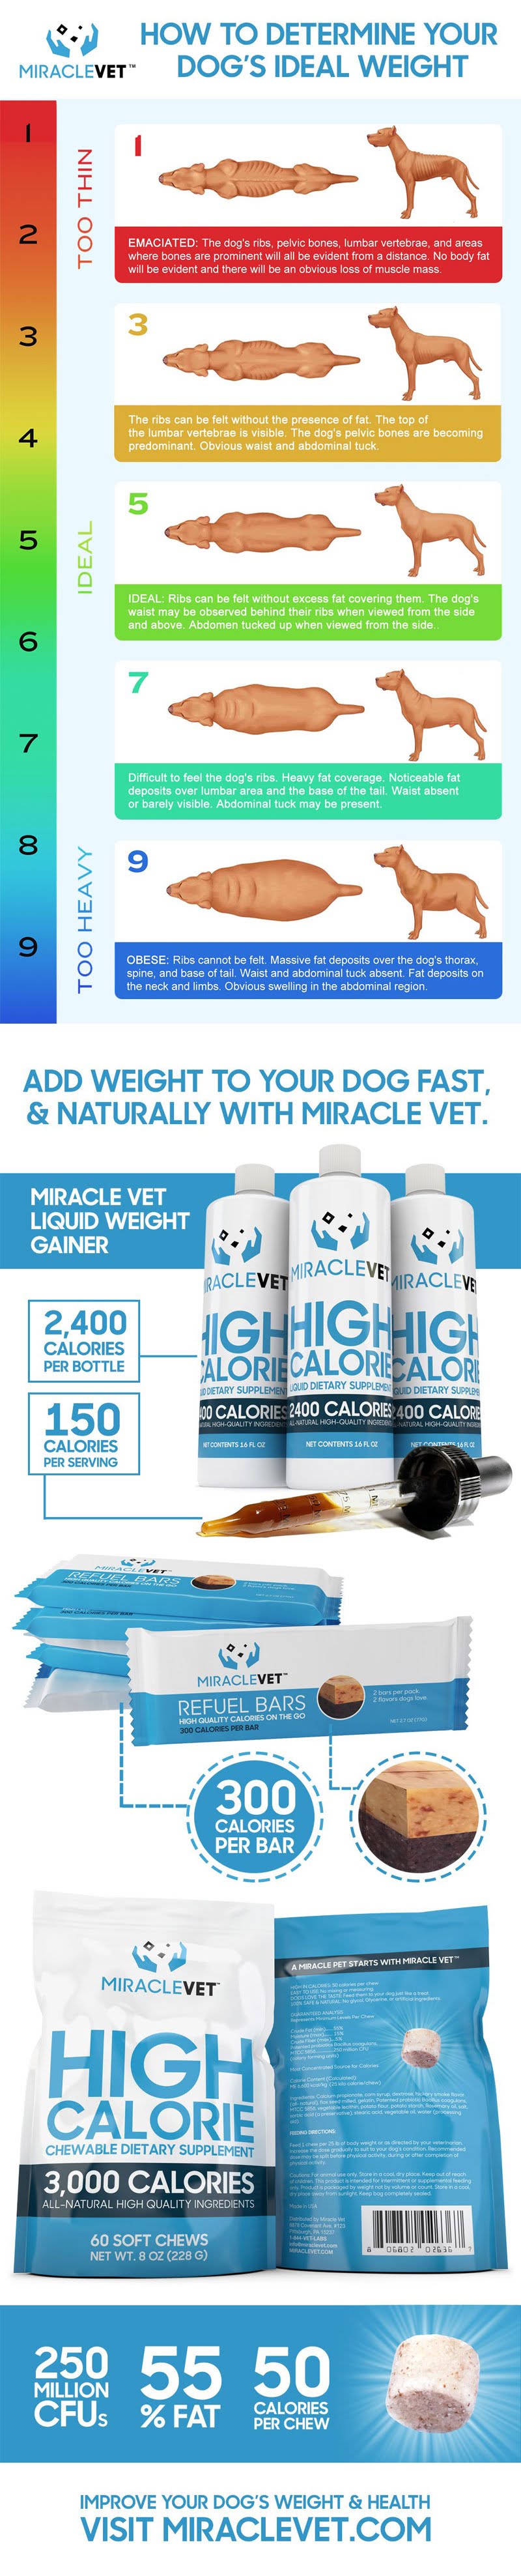 How to Determine Your Dog’s Ideal Weight #infographic